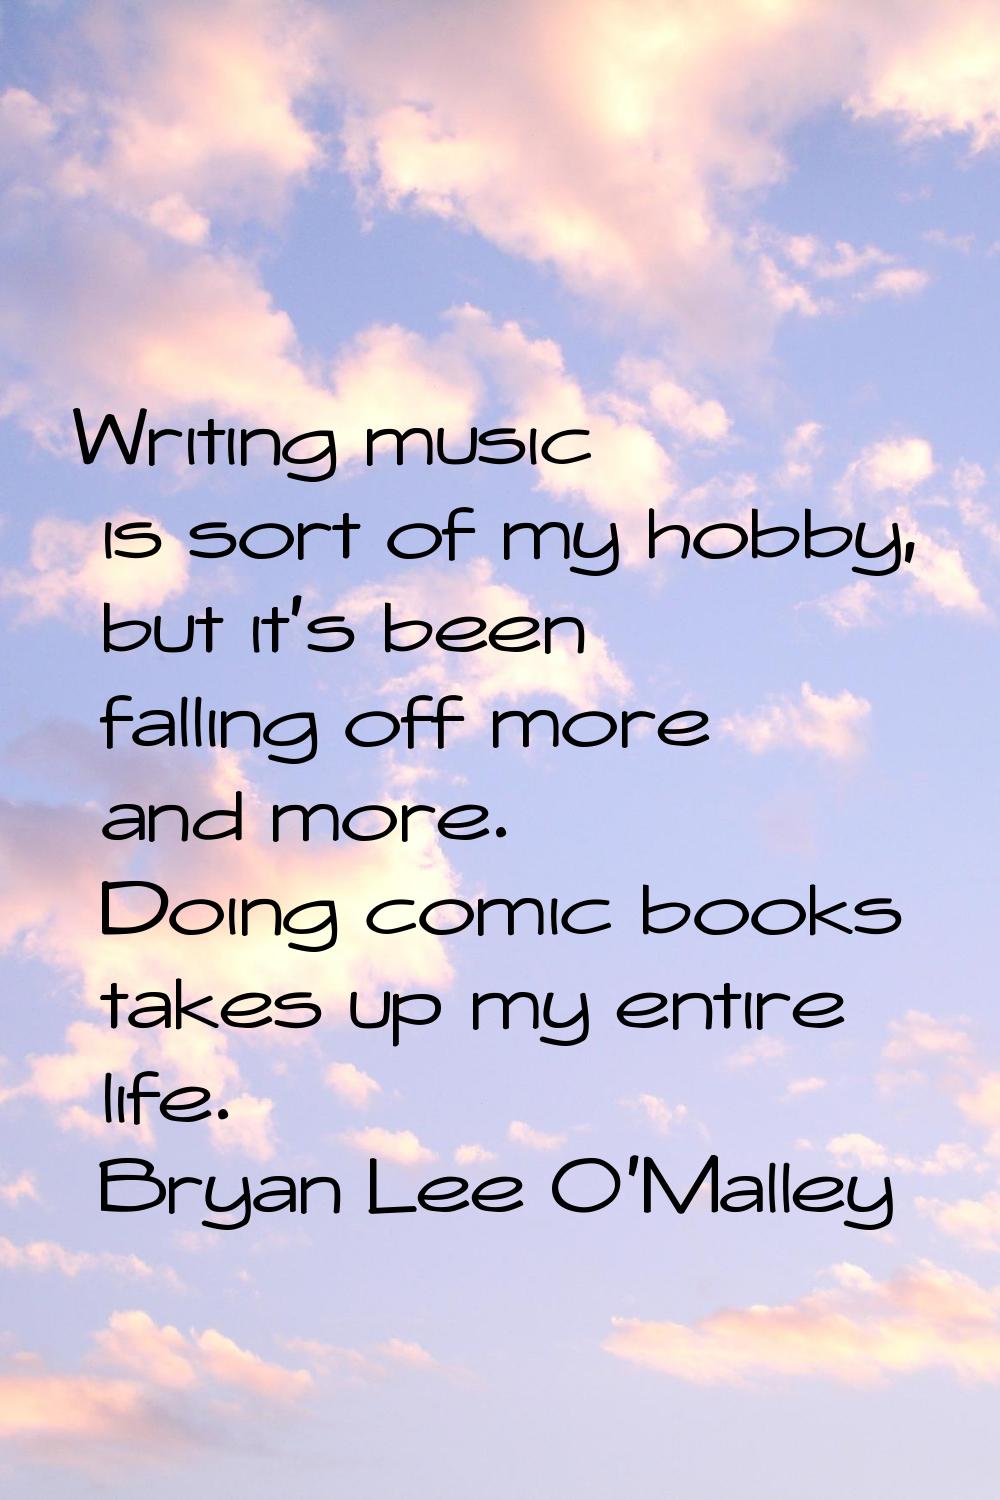 Writing music is sort of my hobby, but it's been falling off more and more. Doing comic books takes